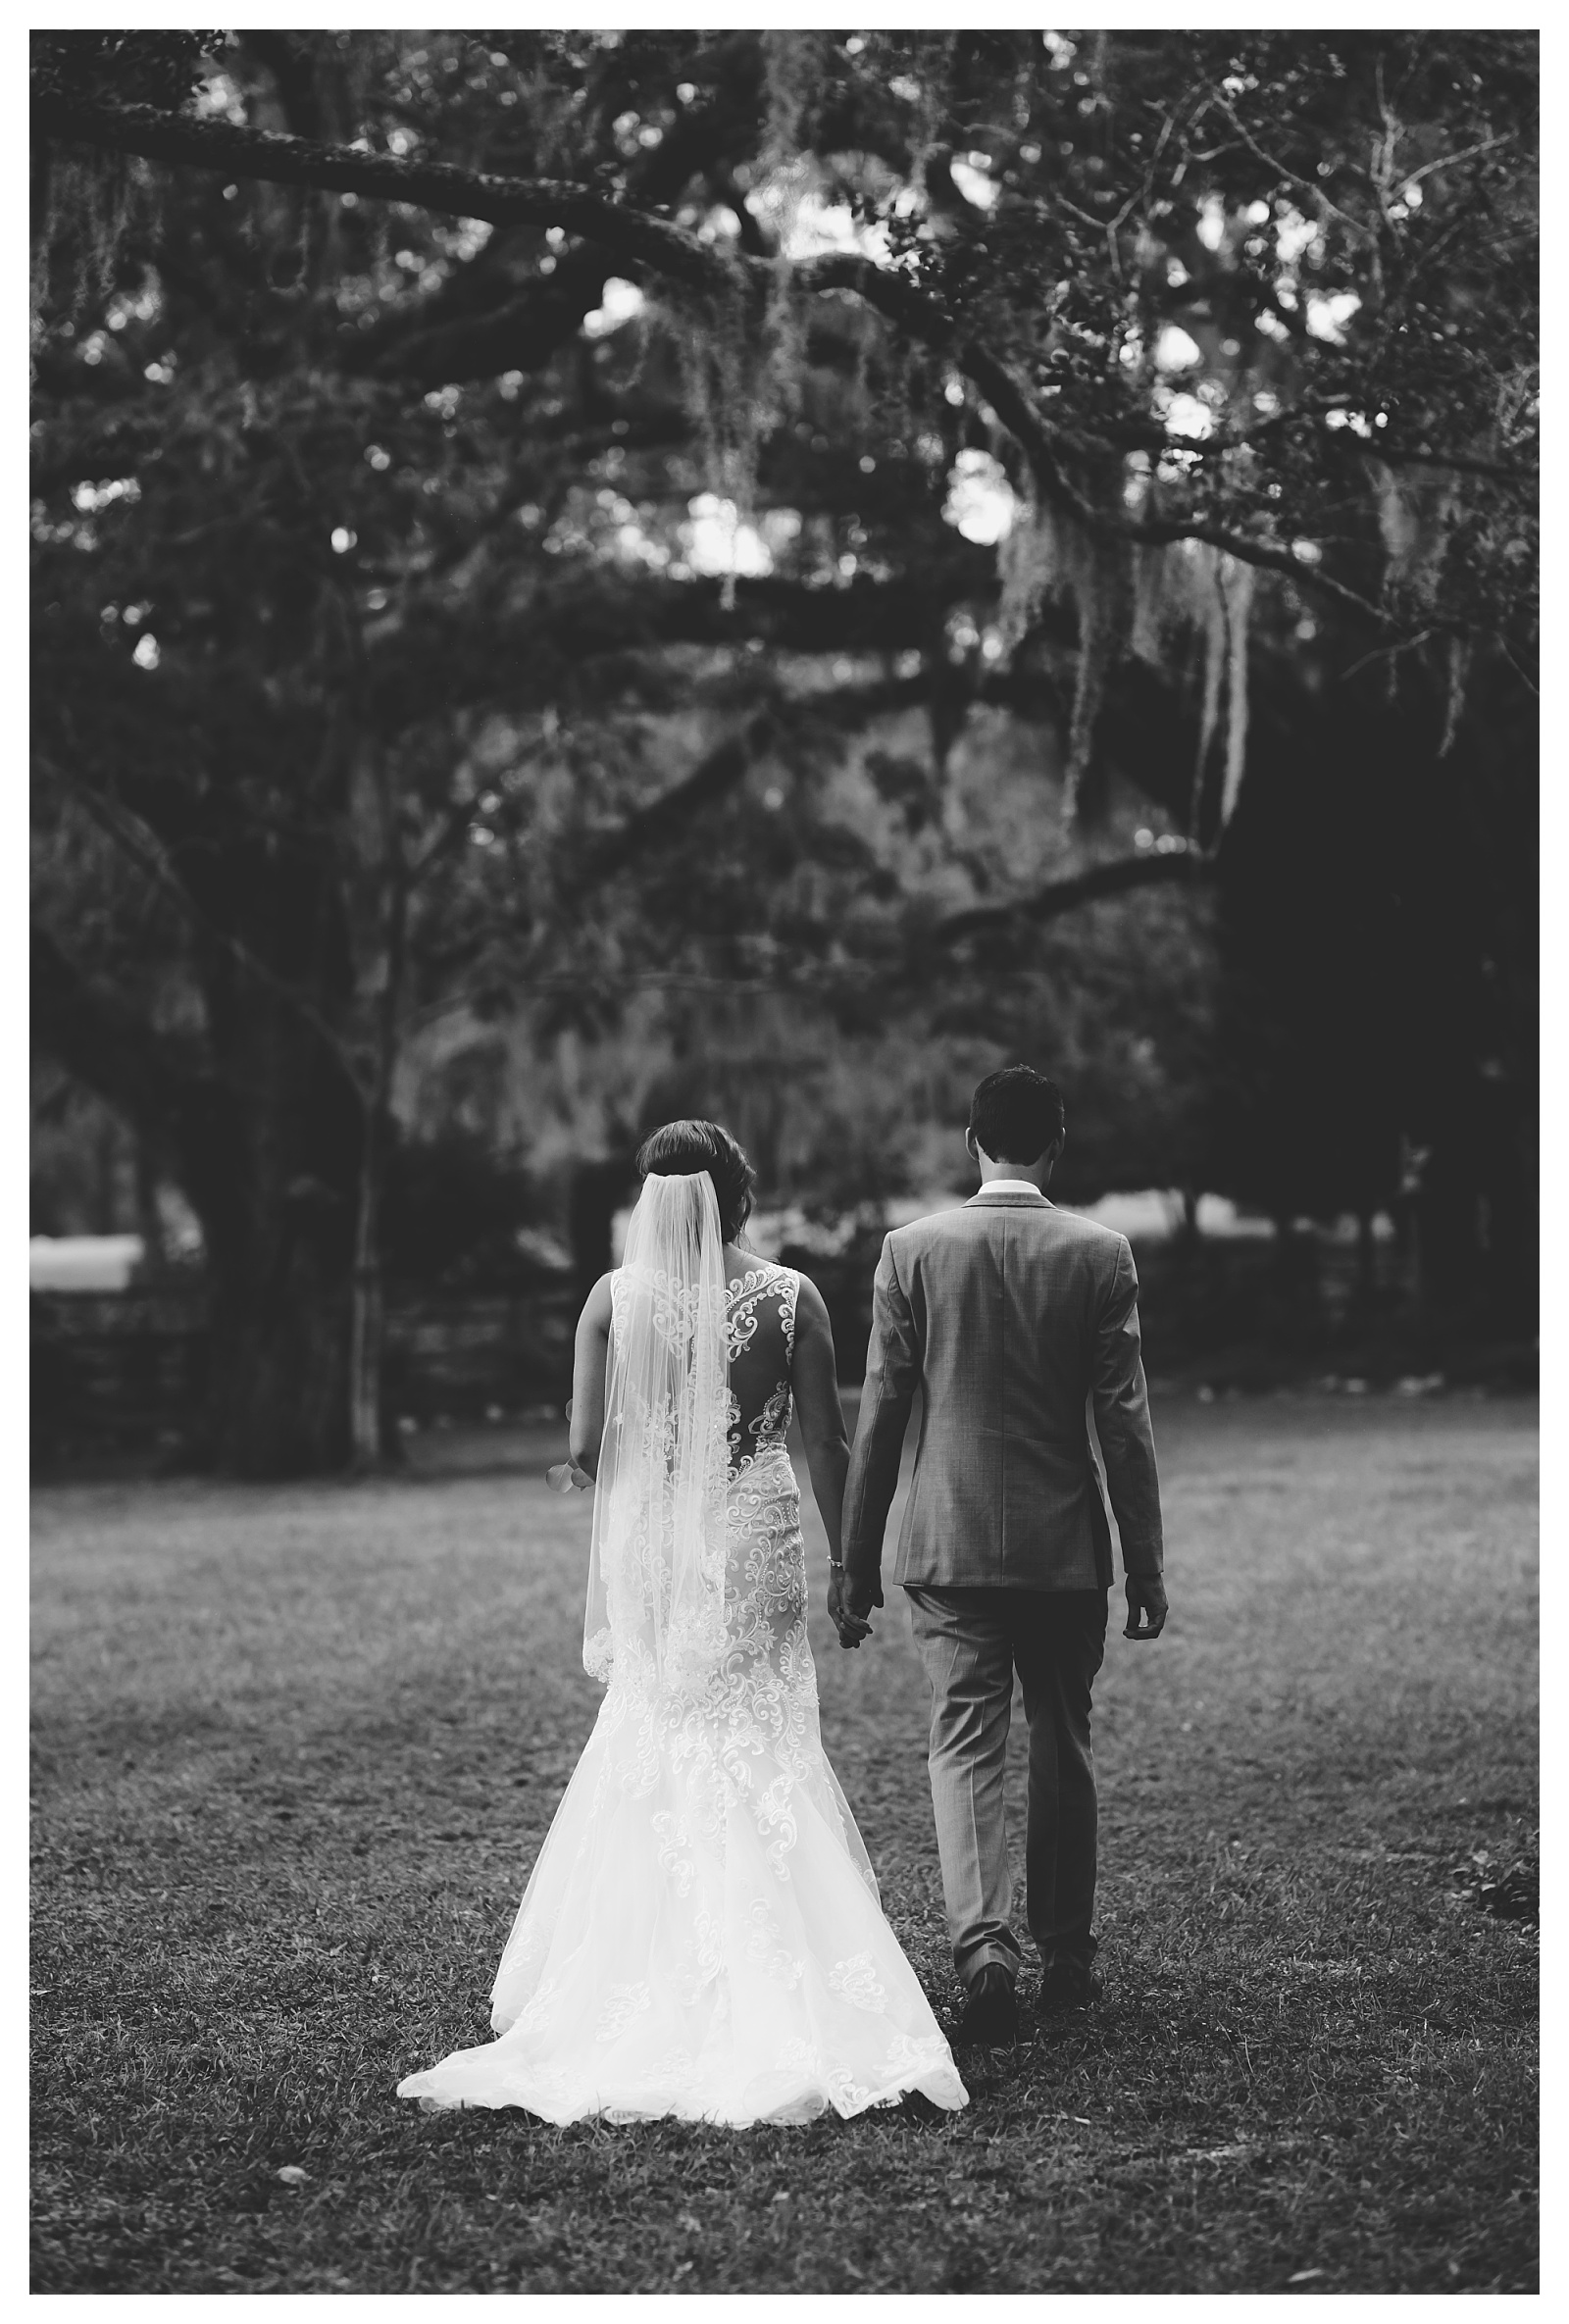 Bride and groom after their ceremony enjoying a moment together. Shelly Williams Photography